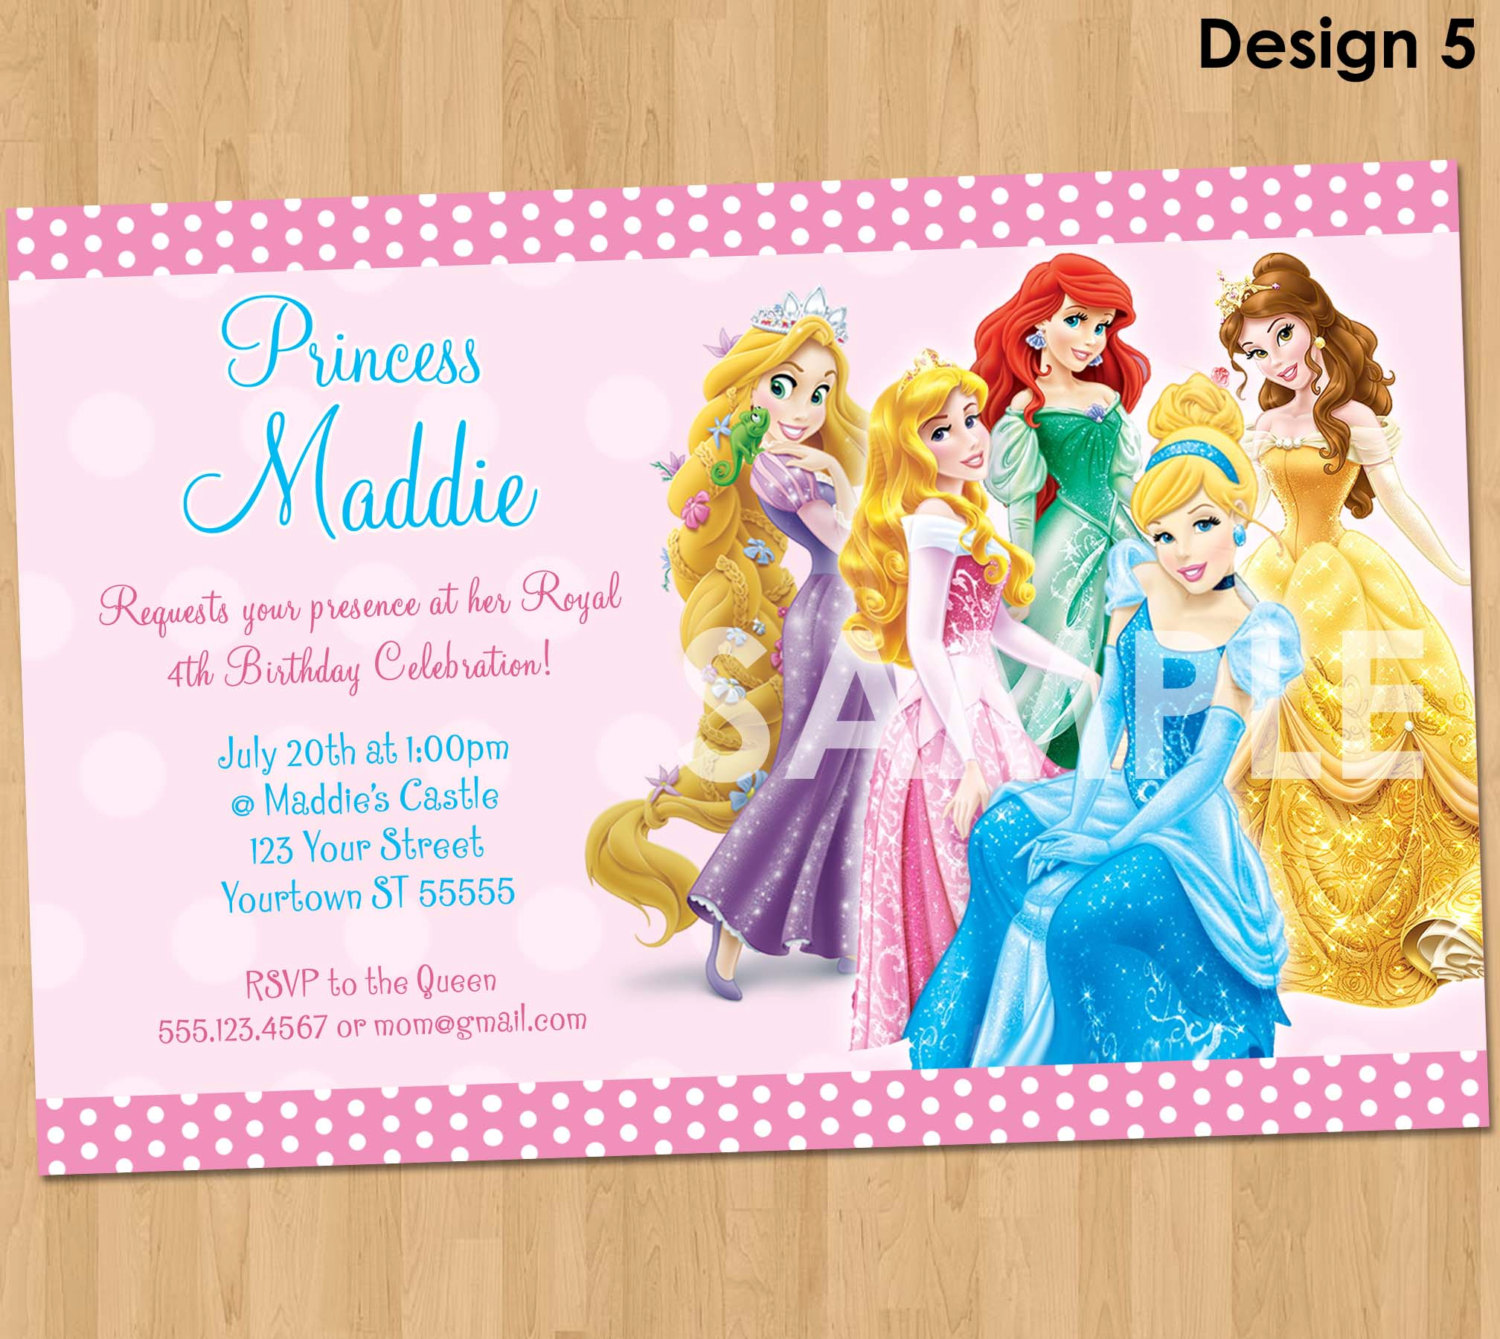 Popular items for princess party 